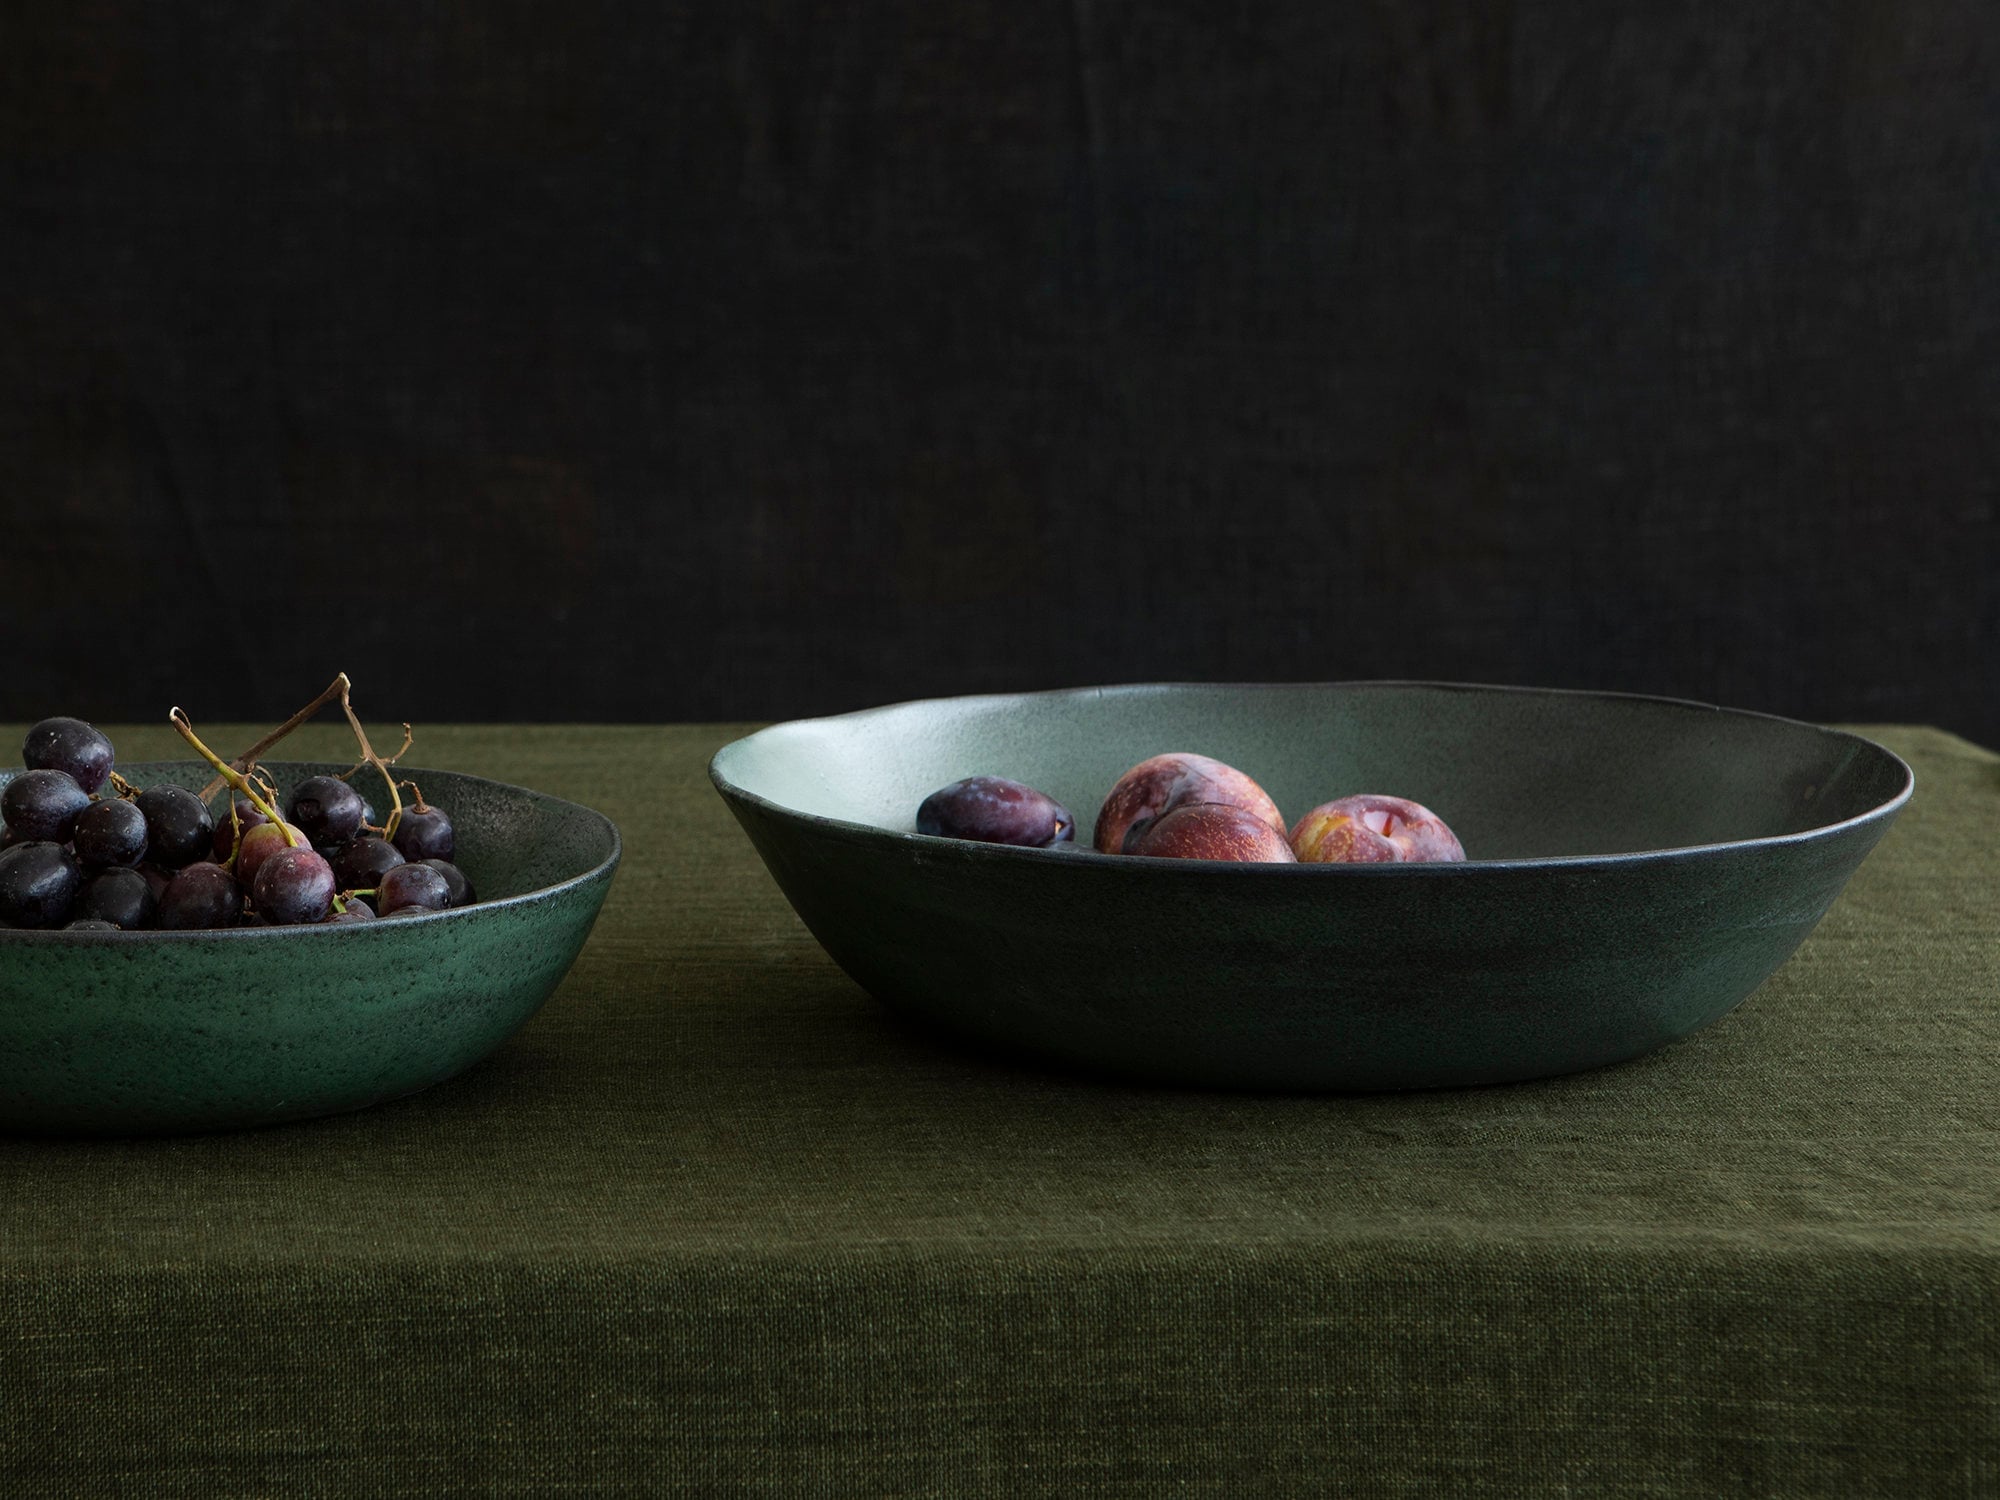 Unique Ceramic Fruit Bowl: Extra Large 5-13 Inch Modern Pottery